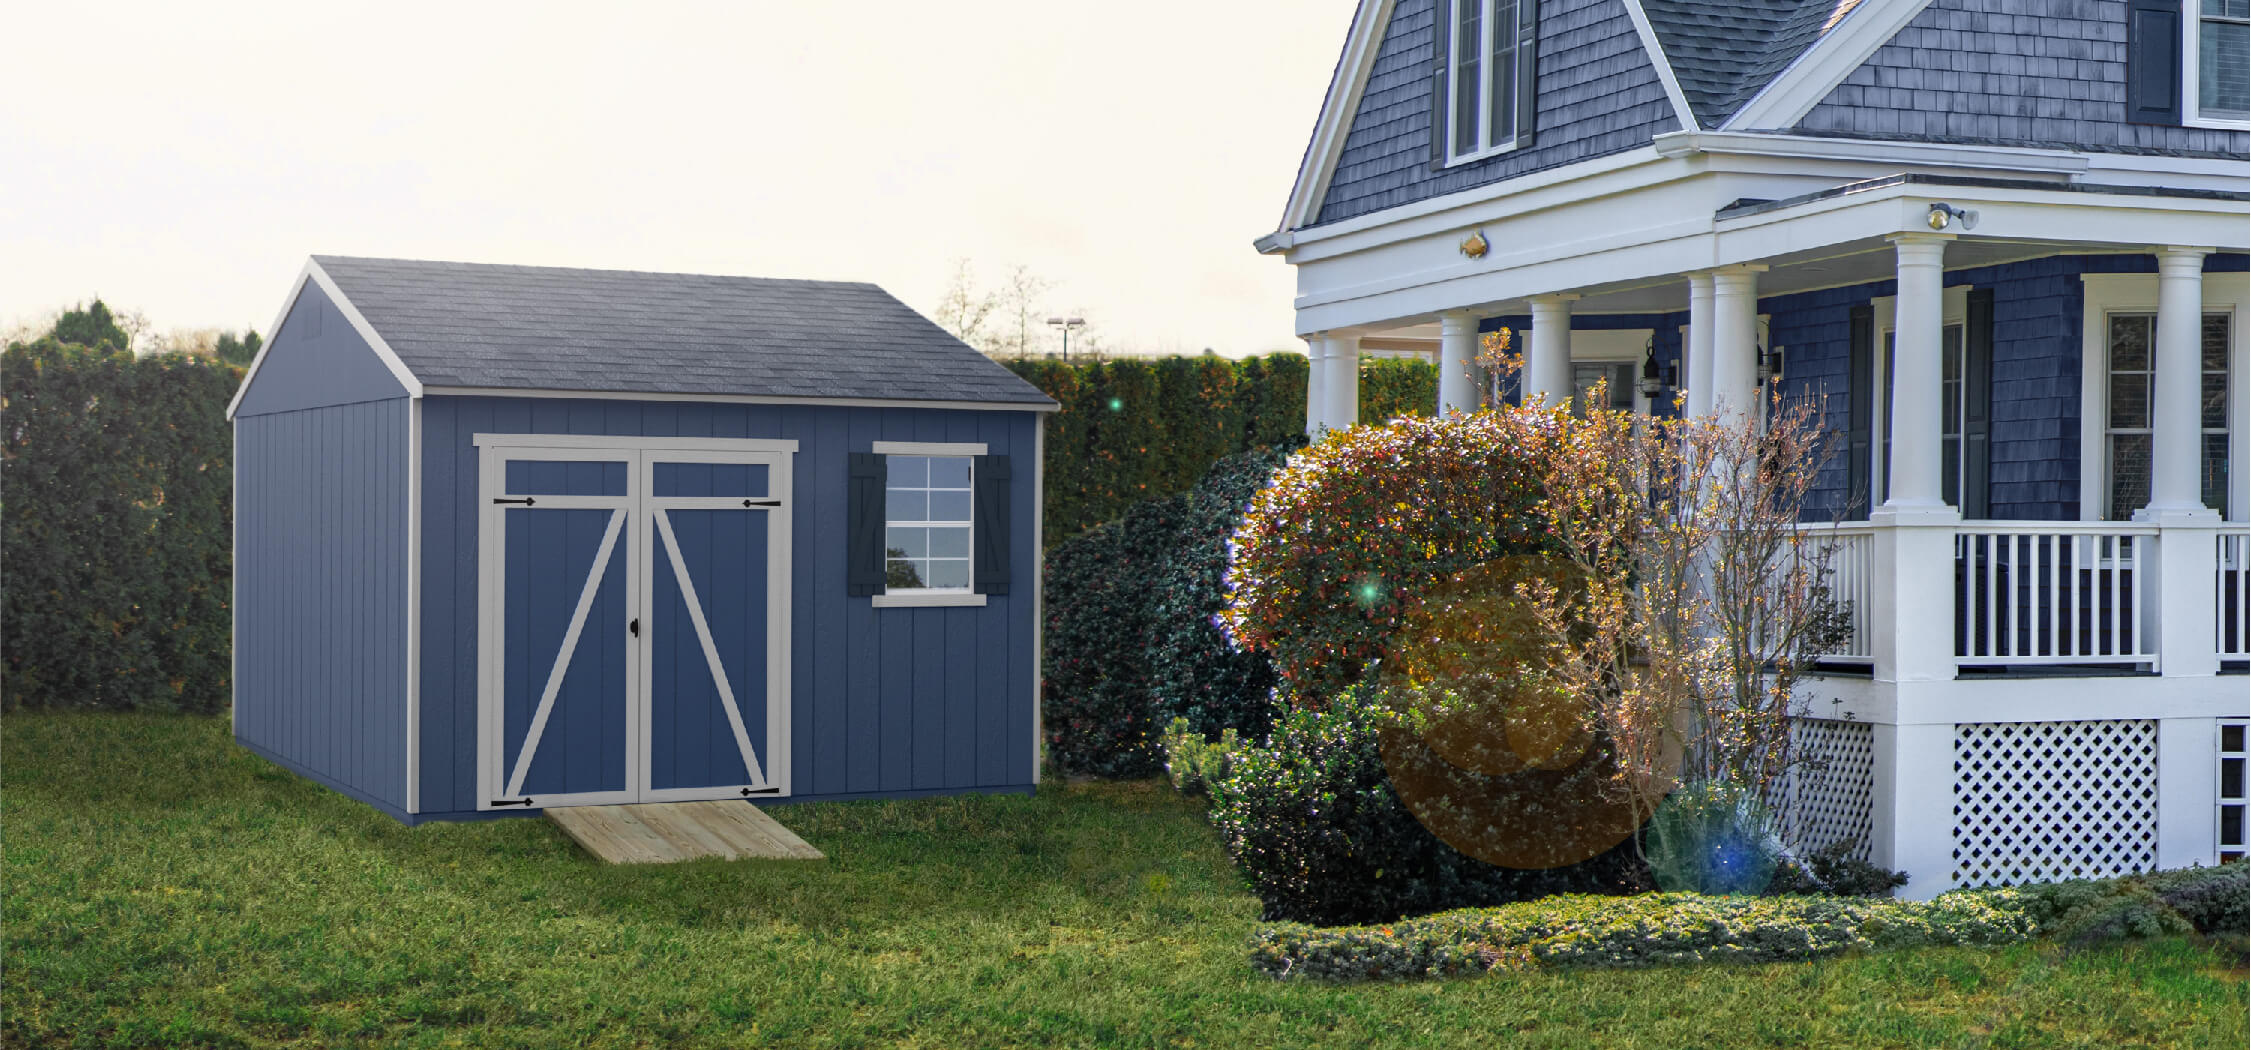 Shed next to house painted to match - blue siding, white shingles, and dark blue shutters.